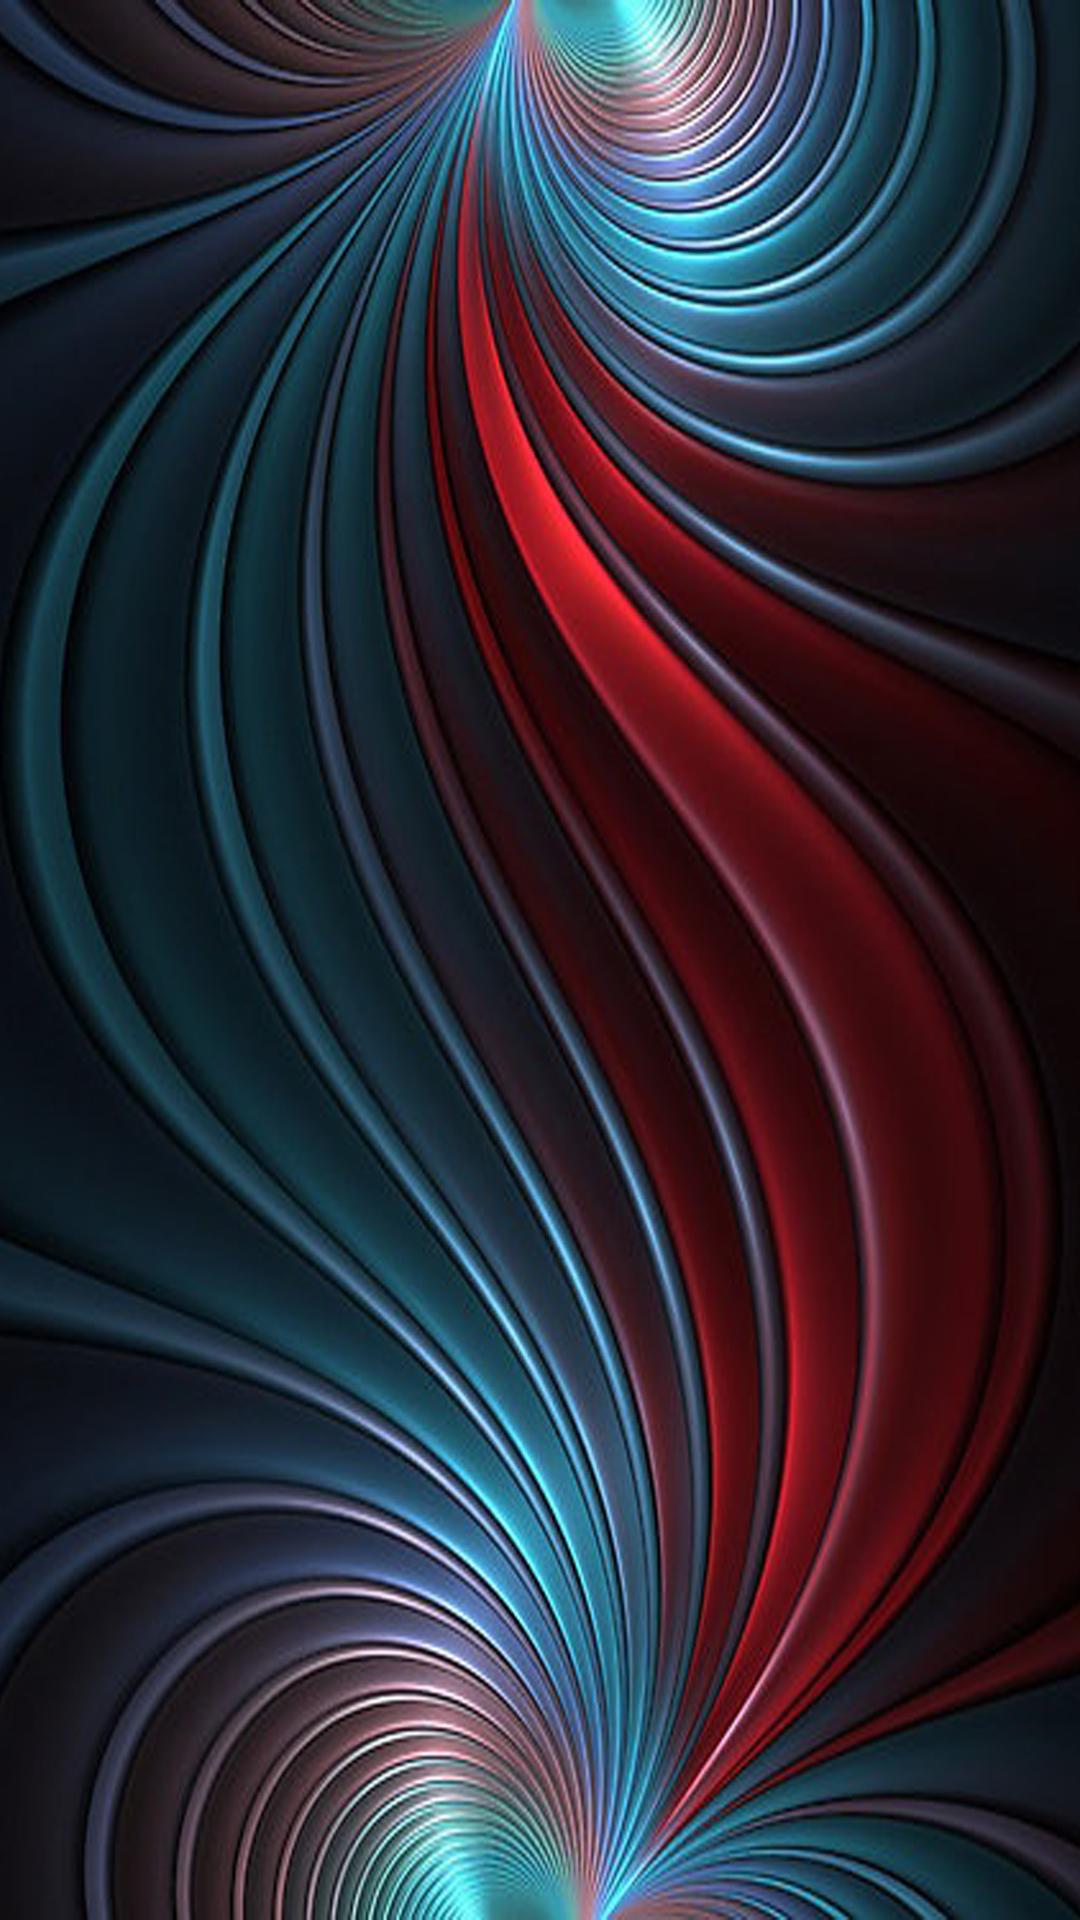 Abstract Wallpaper Free Vector Art Free Downloads